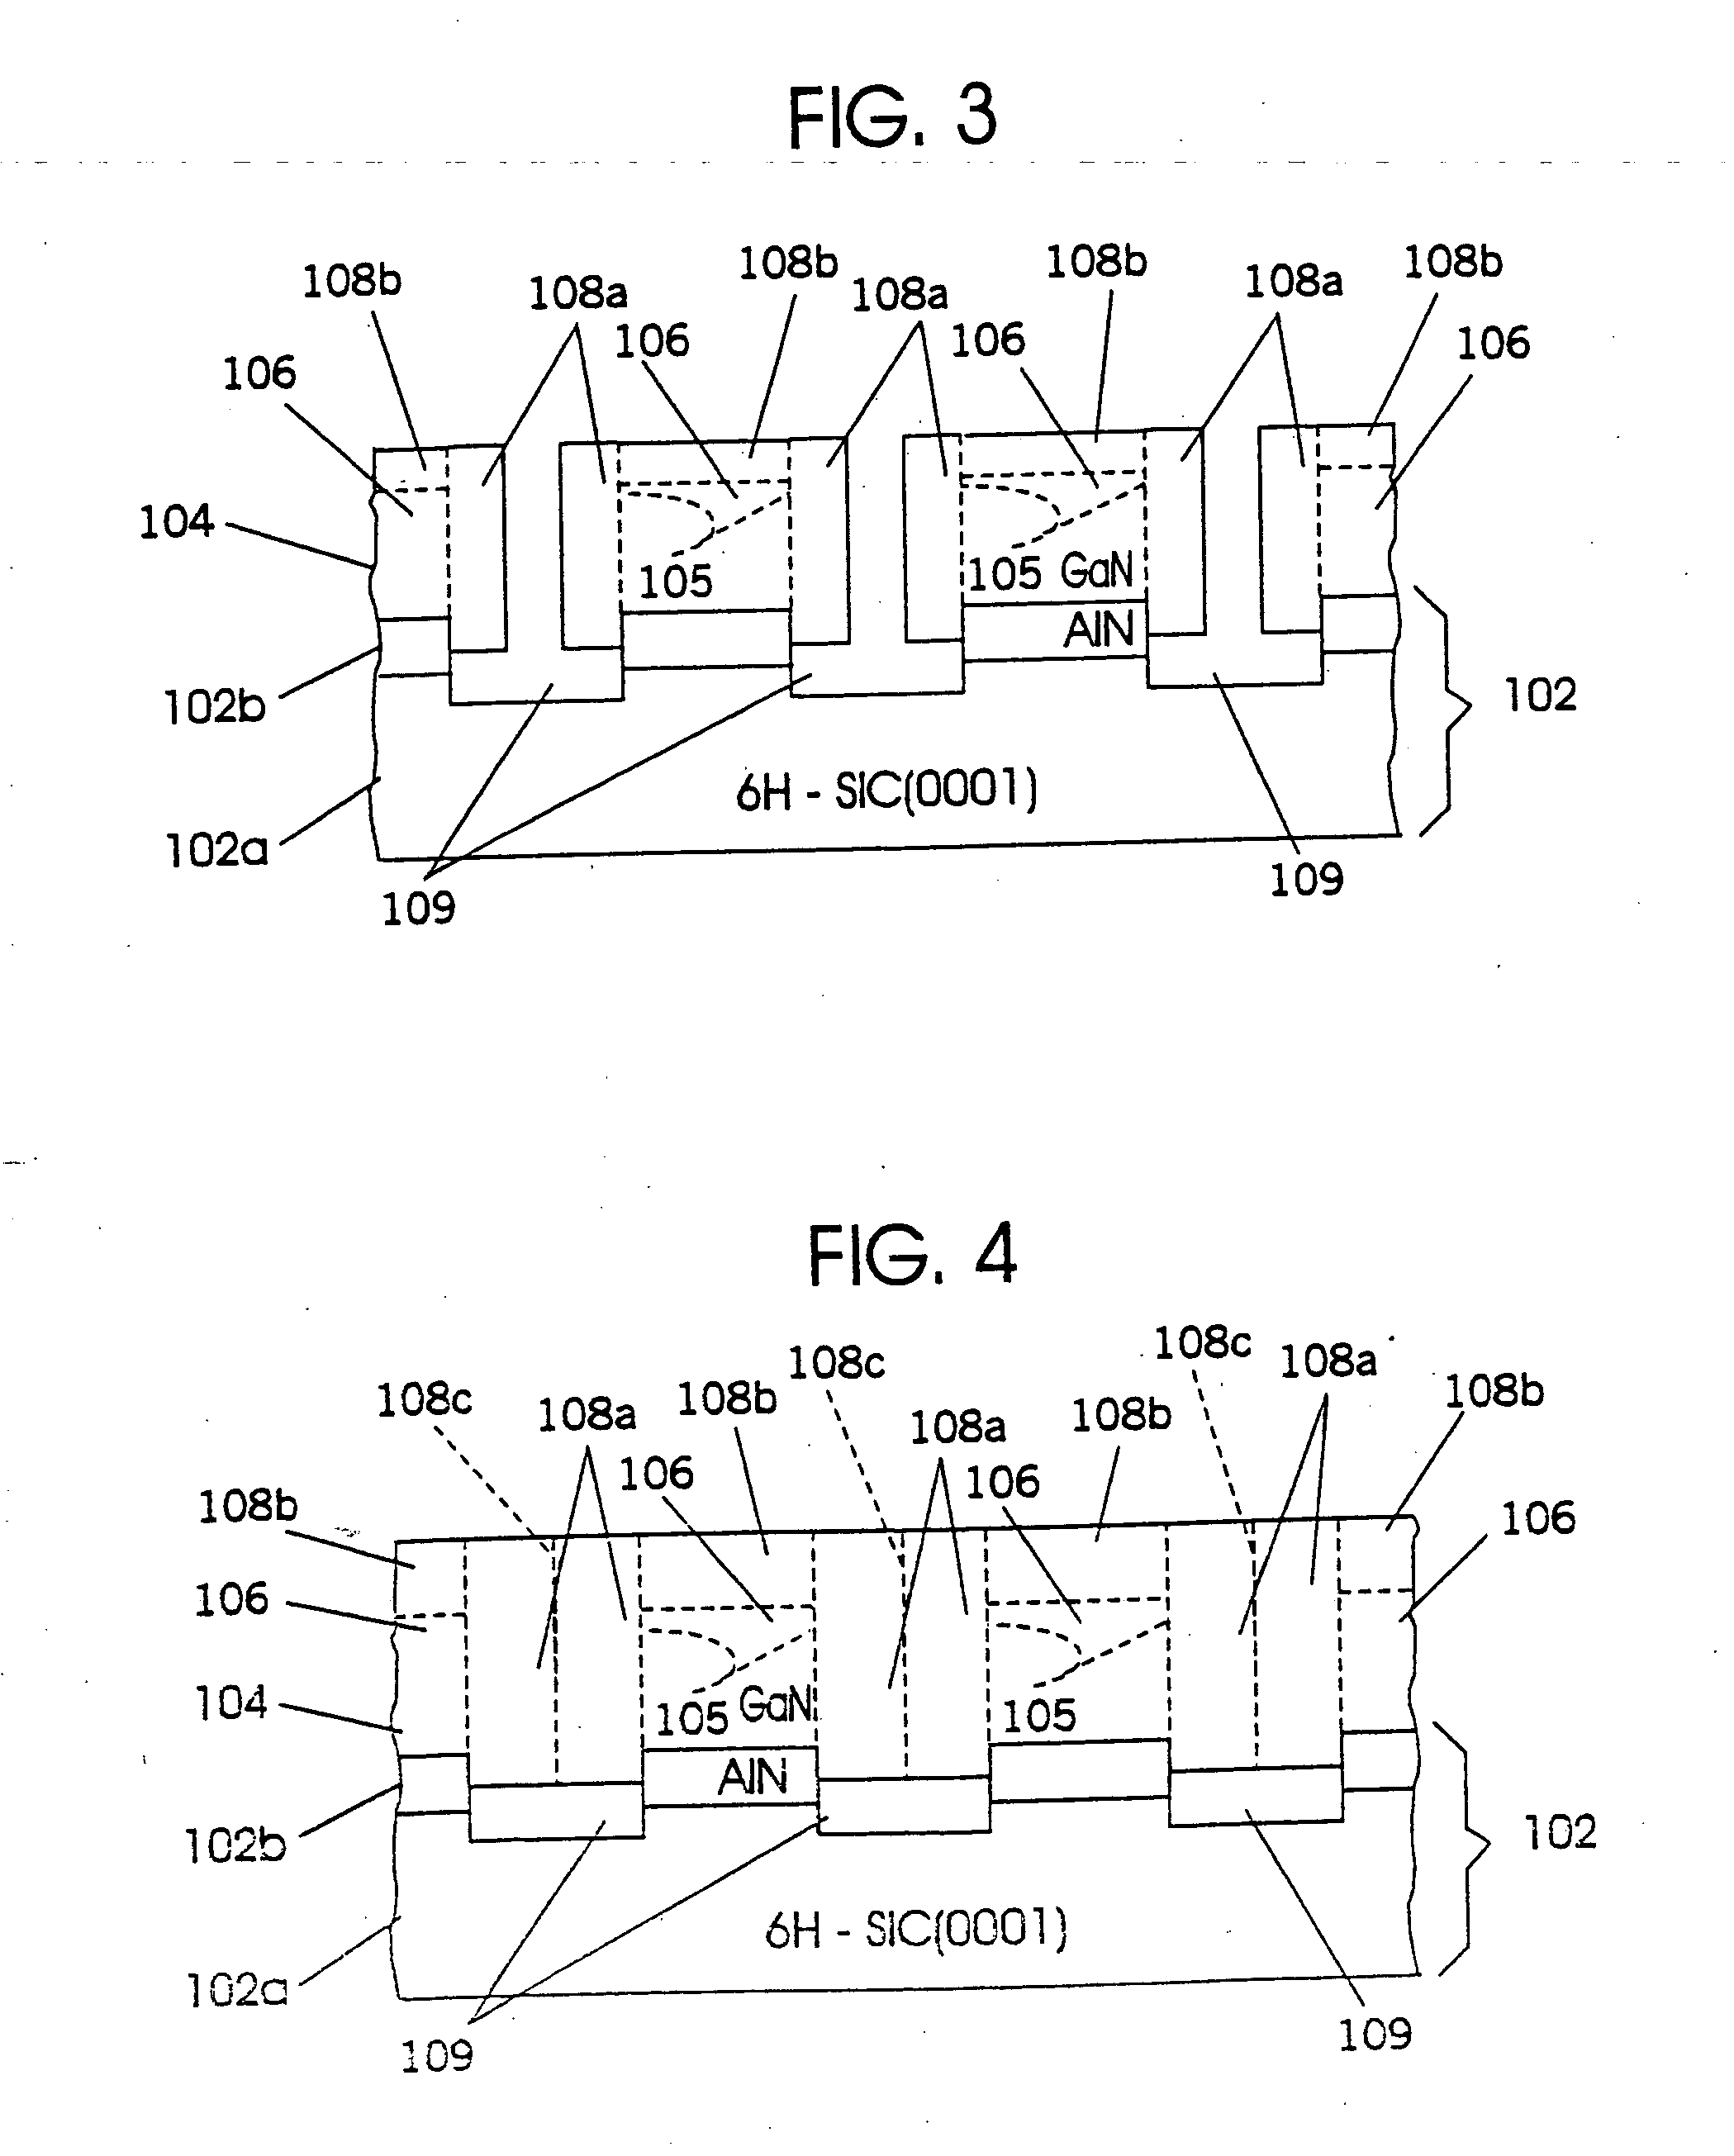 Methods of fabricating gallium nitride semiconductor layers by lateral growth into trenches